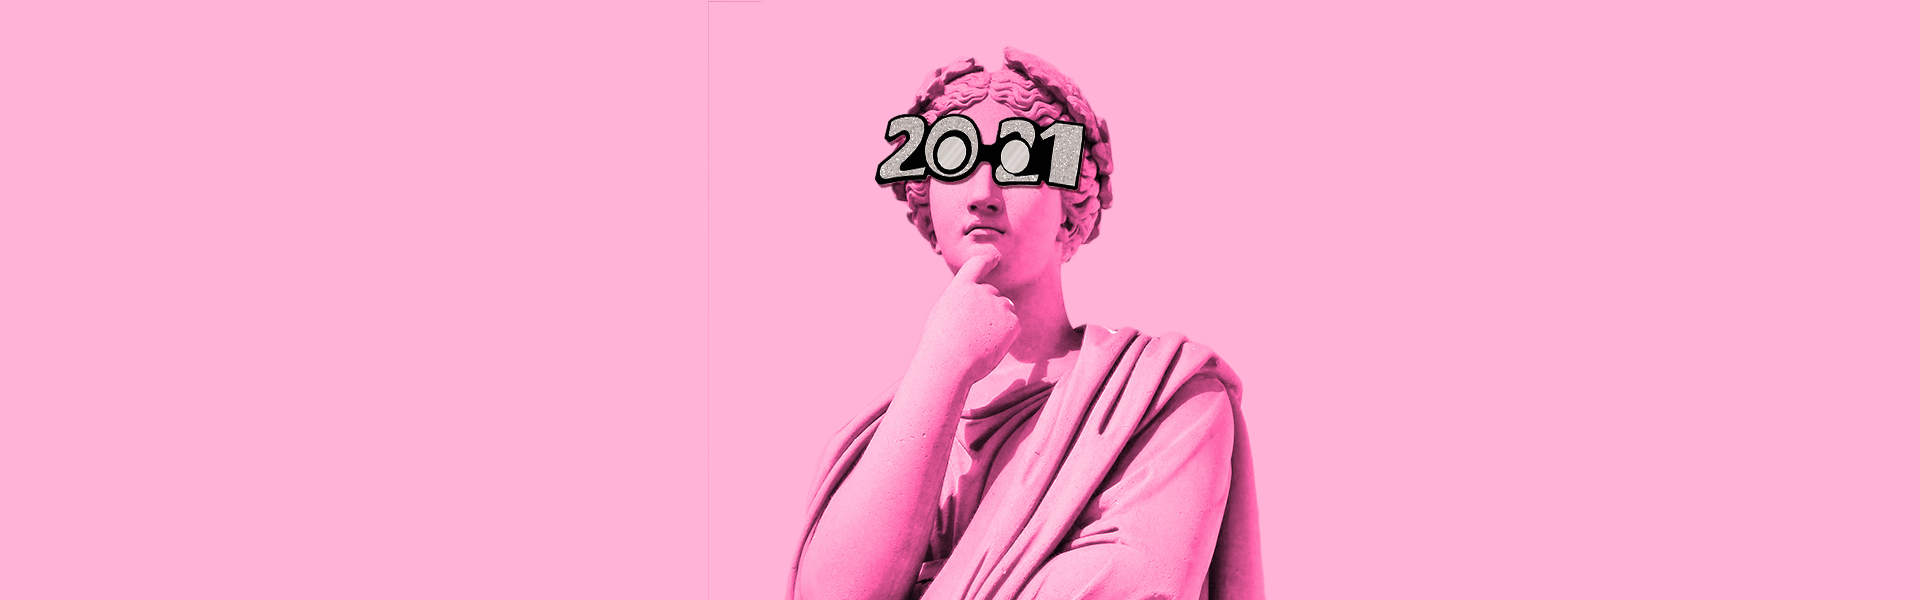 Ancient Greek-style bust in thinking pose with 2021 glasses in pink wash